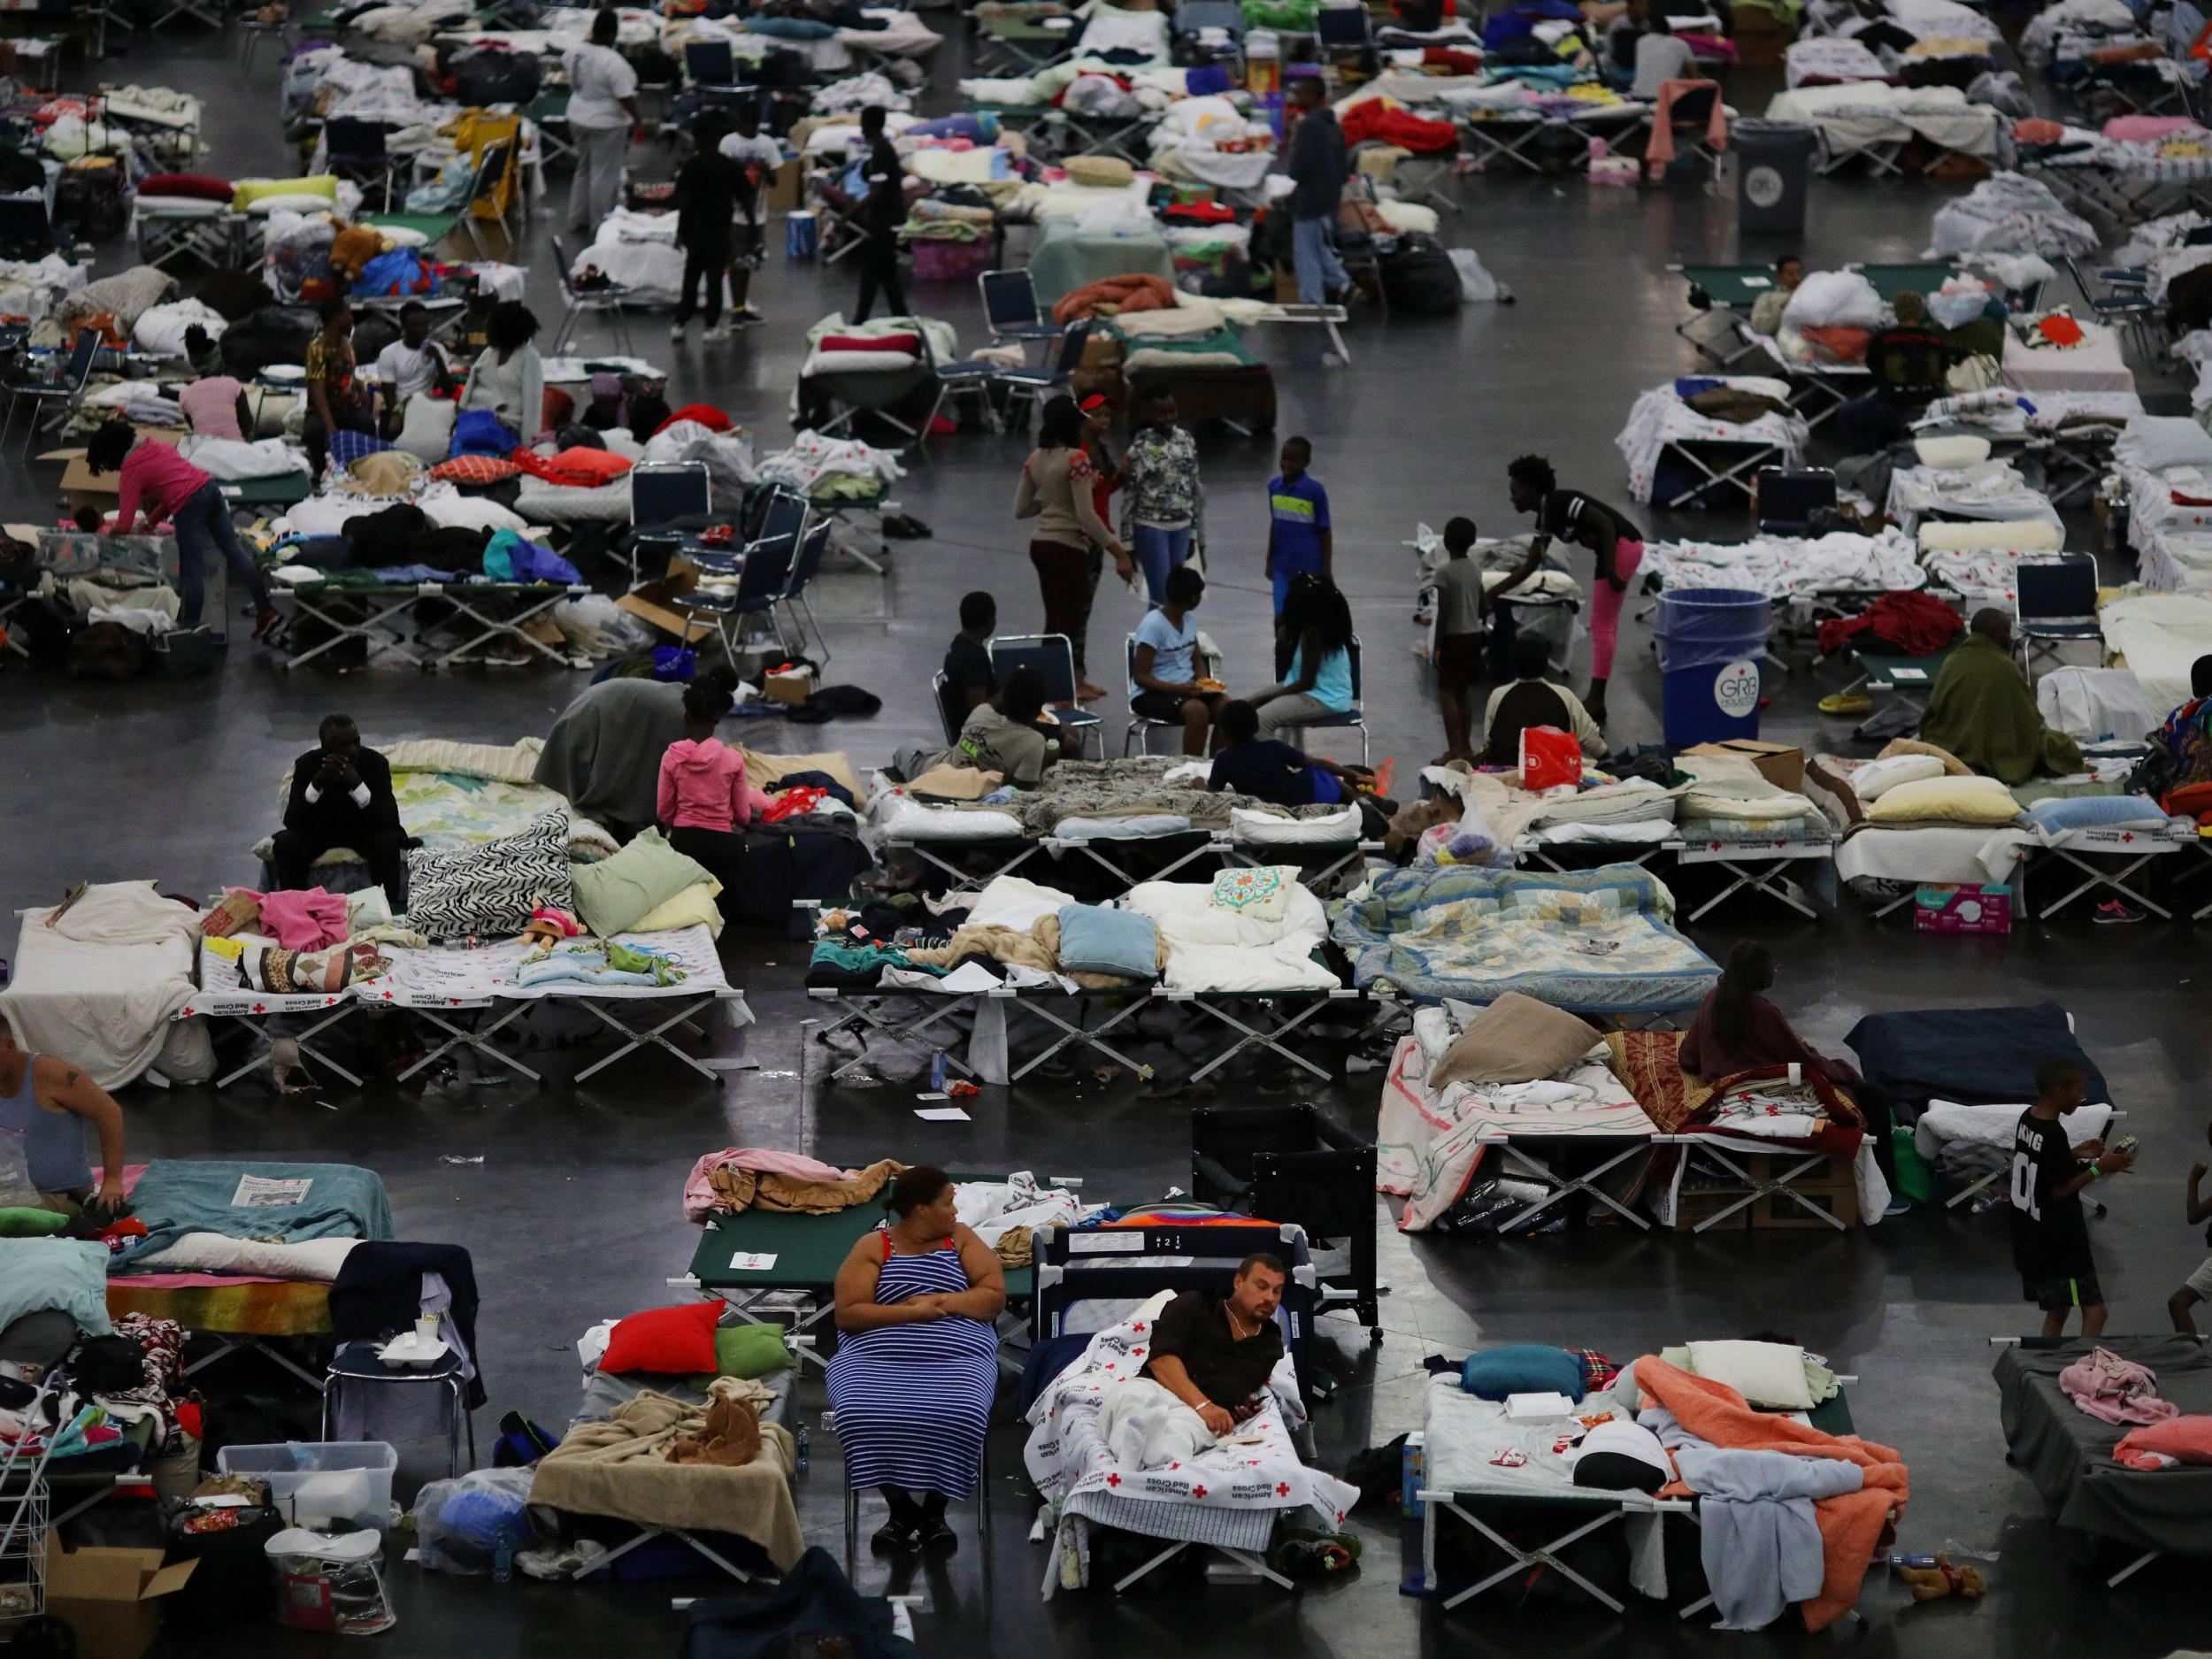 Evacuees affected by Tropical Storm Harvey take shelter at the George R Brown Convention Center in downtown Houston